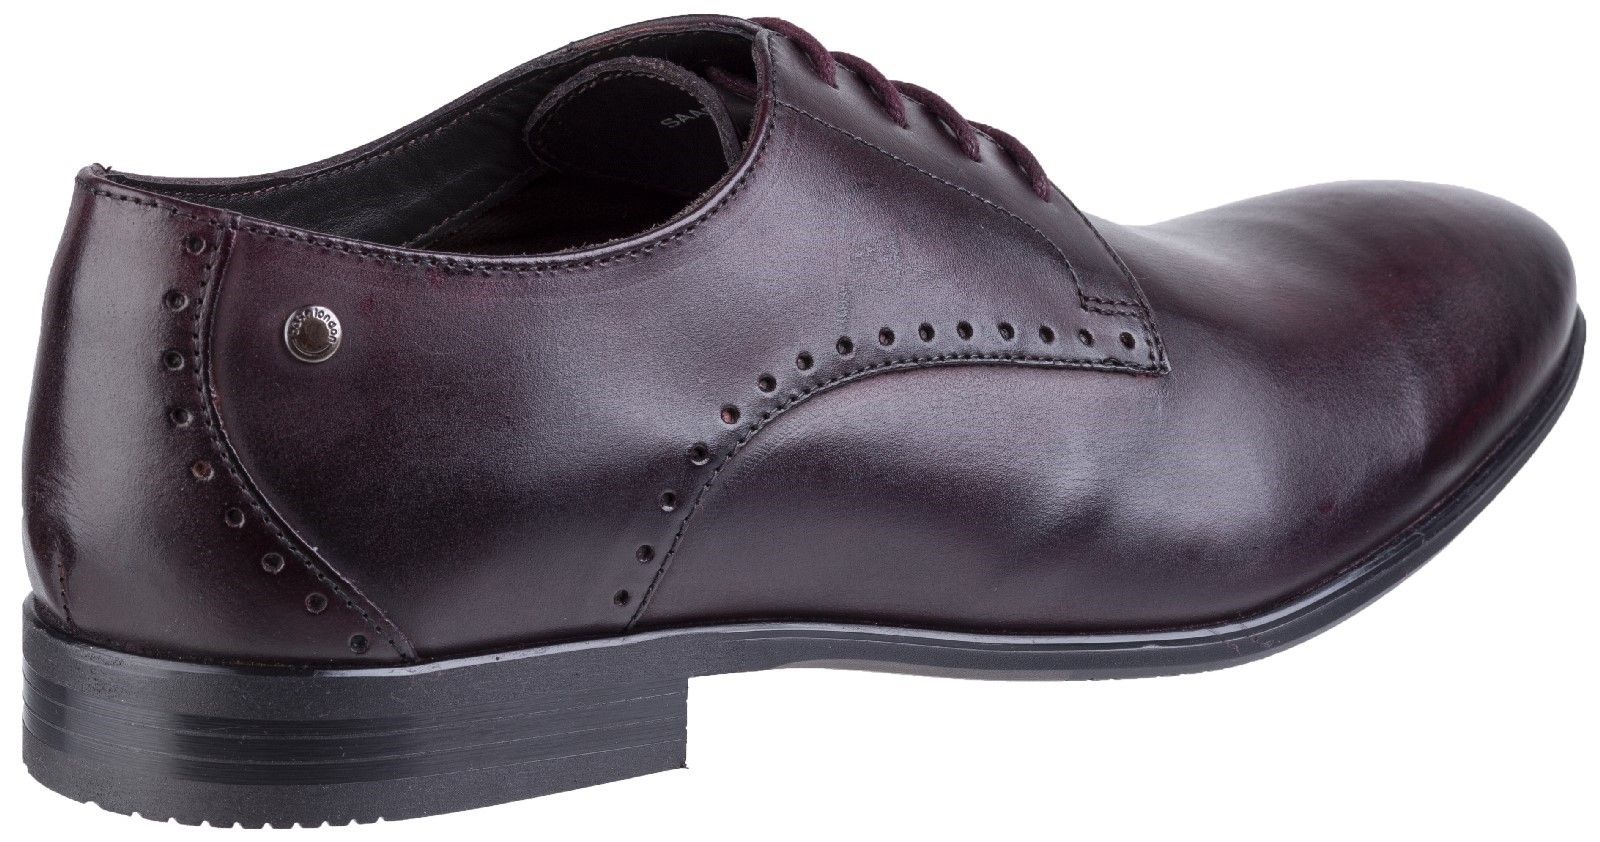 Westbury is a chiseled tip plain toe derby from the Concierge collection. A non-fussy design with simple but eye-catching hole punch detailing on the side panelling. Its rubber sole provides a confident step and is perfect for that smart occasion. Hole Punch Details. 
Formal Styling.